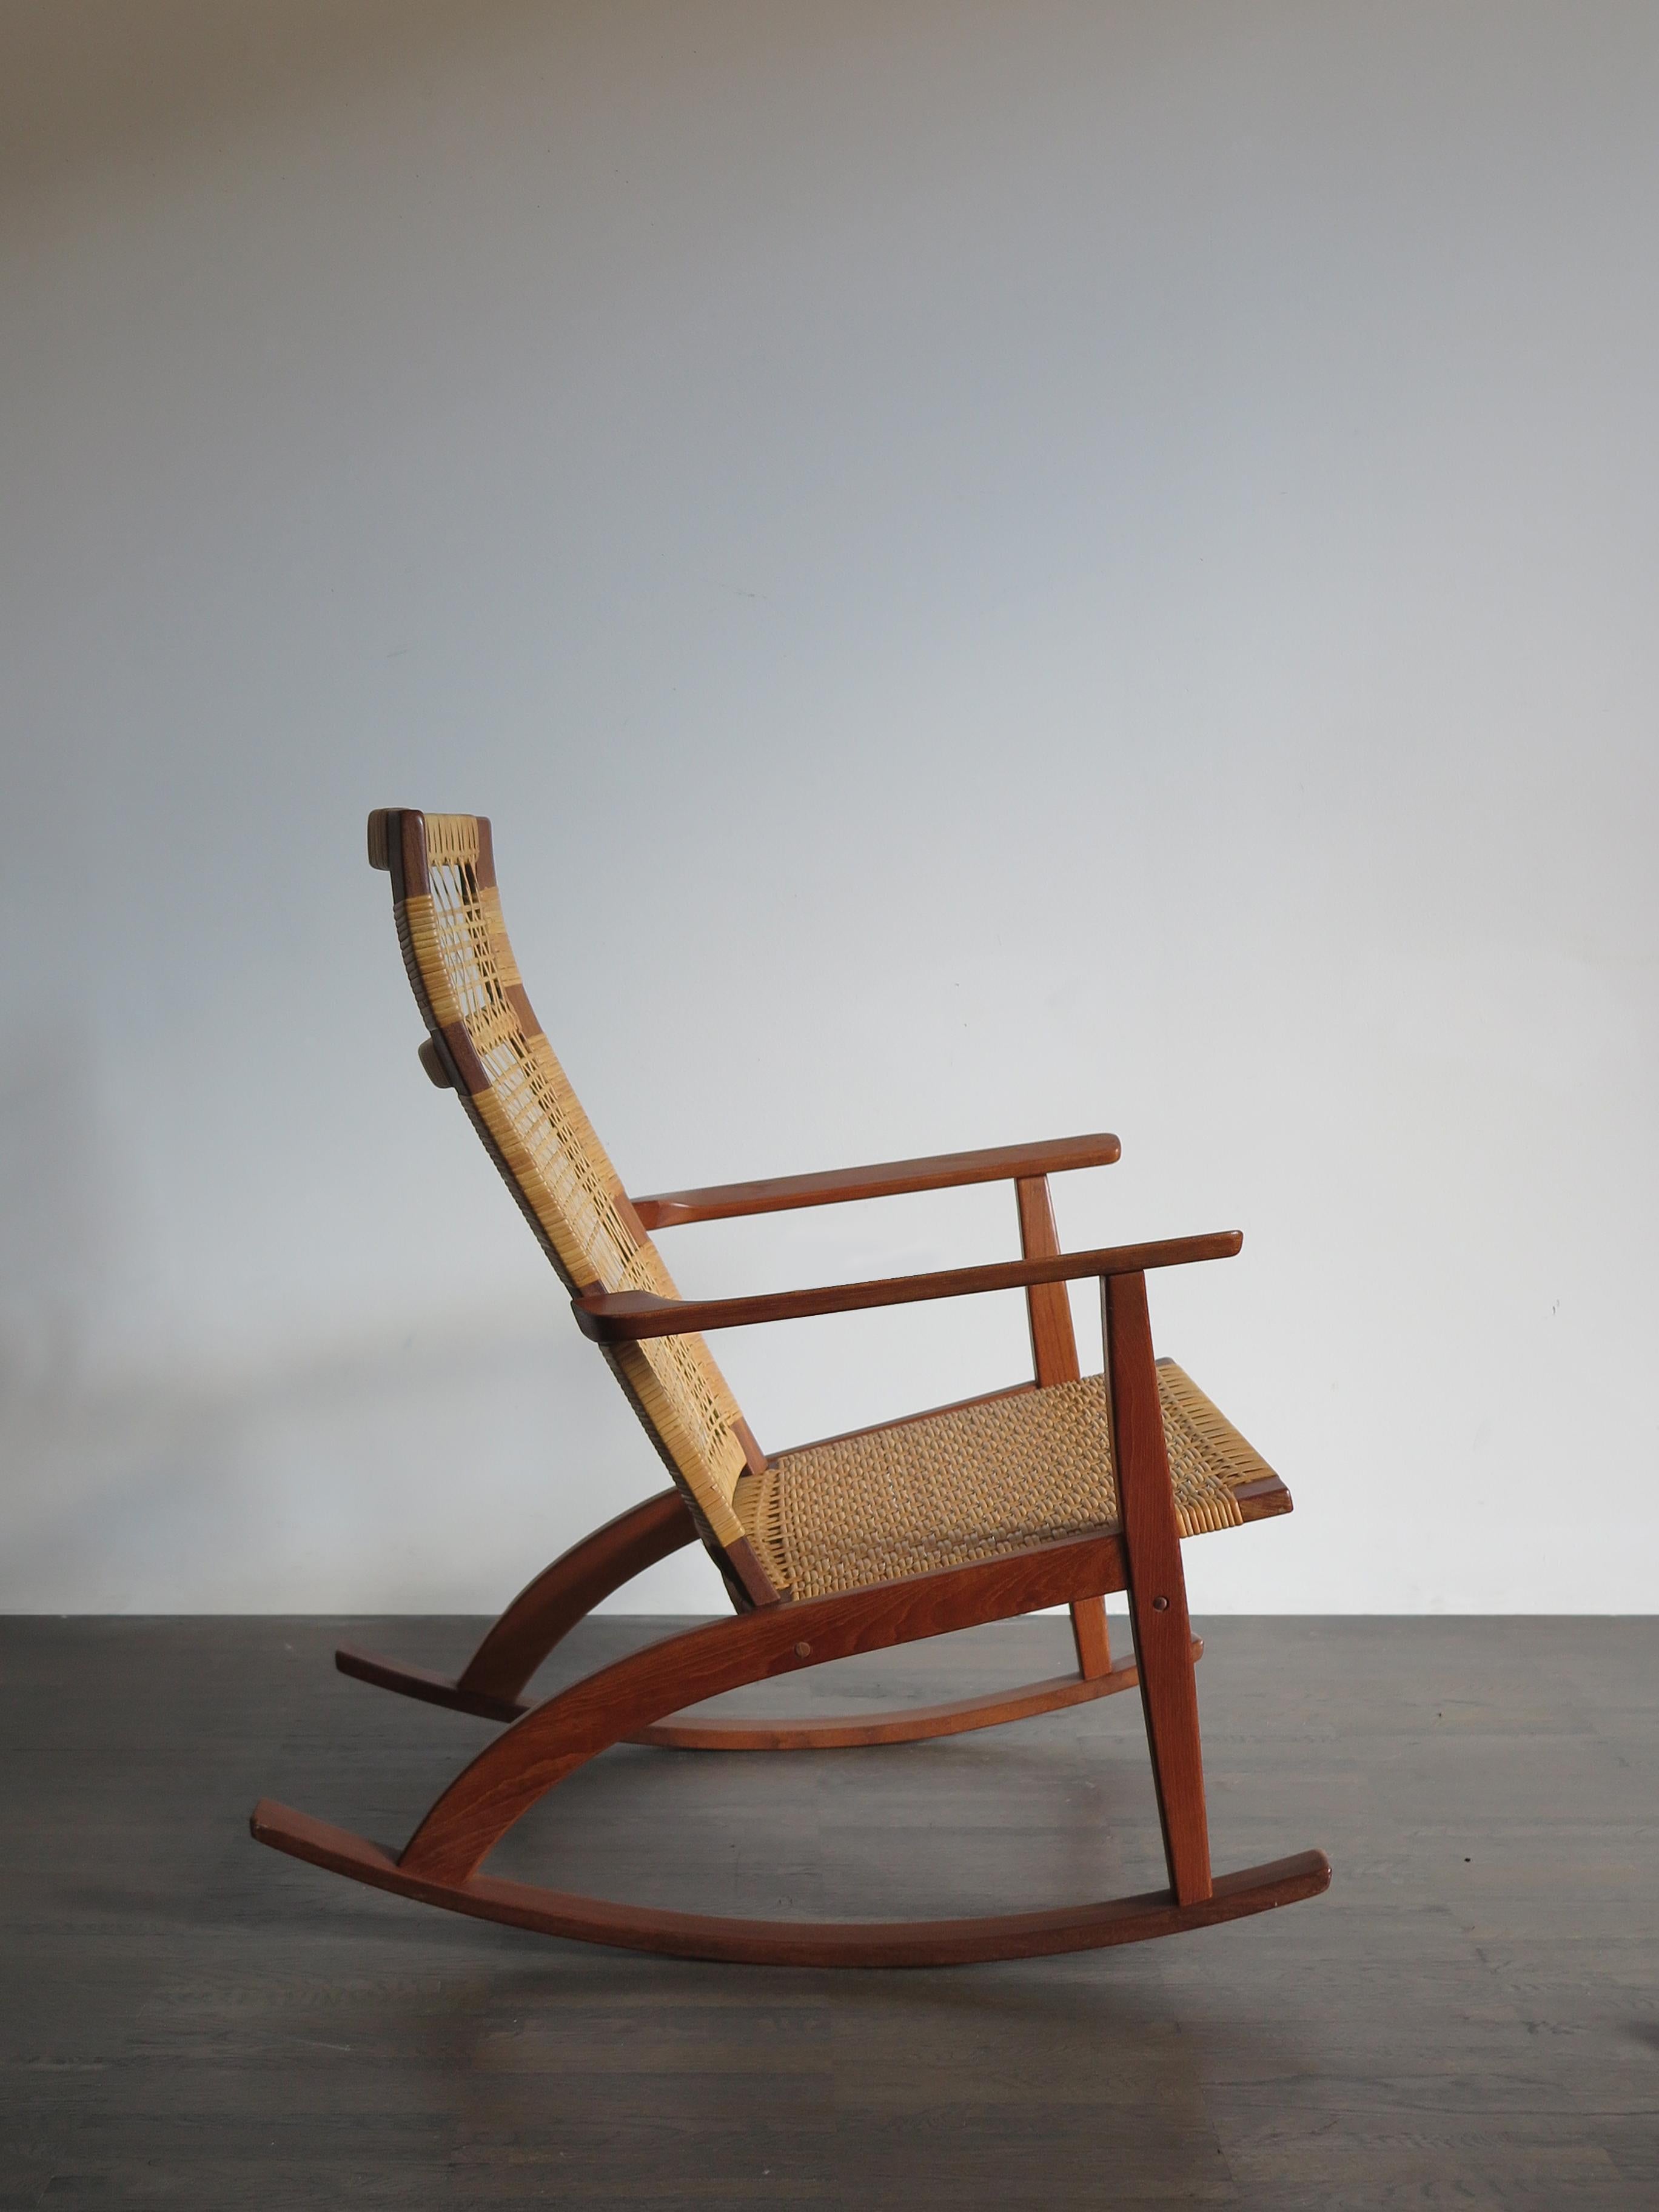 Scandinavian Mid-Century Modern design very rare model rocking chair with seat and back in woven cane designed by Hans Olsen and produced by Juul Kristensen, Denmark, 1950s.
Manufacturer's brand under the seat.

Very excellent vintage condition.